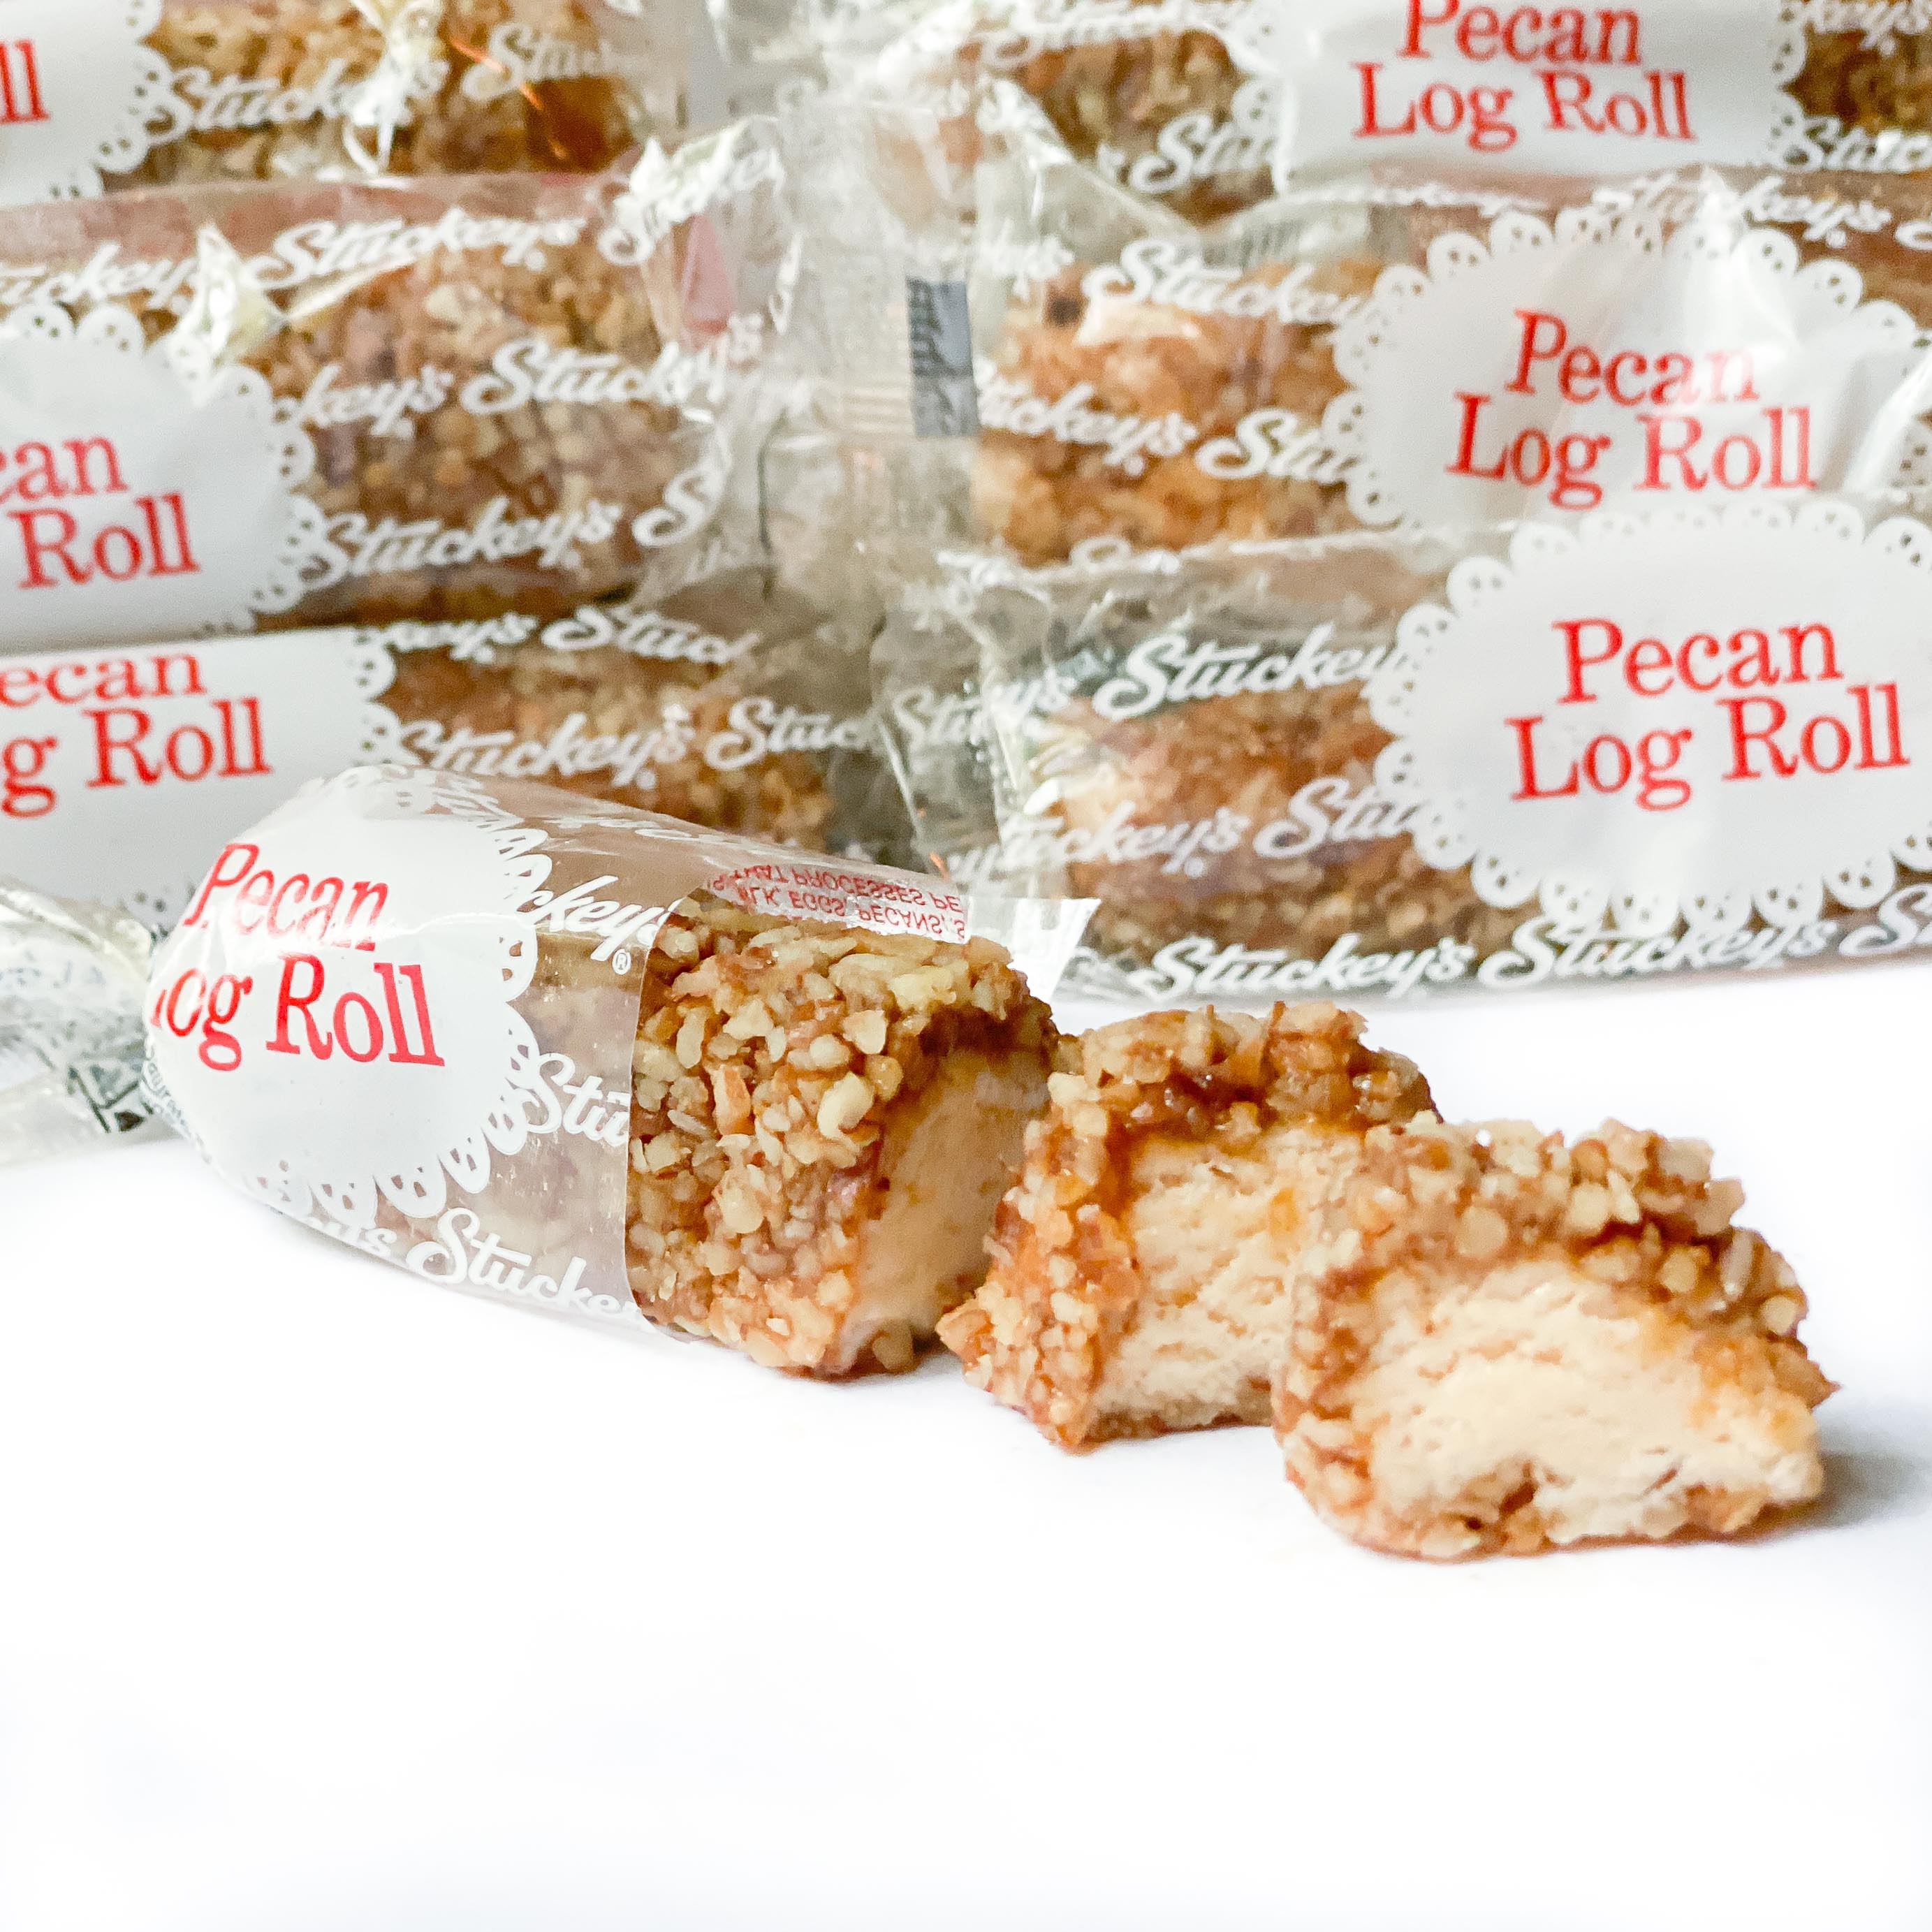 The pecan log roll is Stuckey’s most popular (and famous) candy item. 